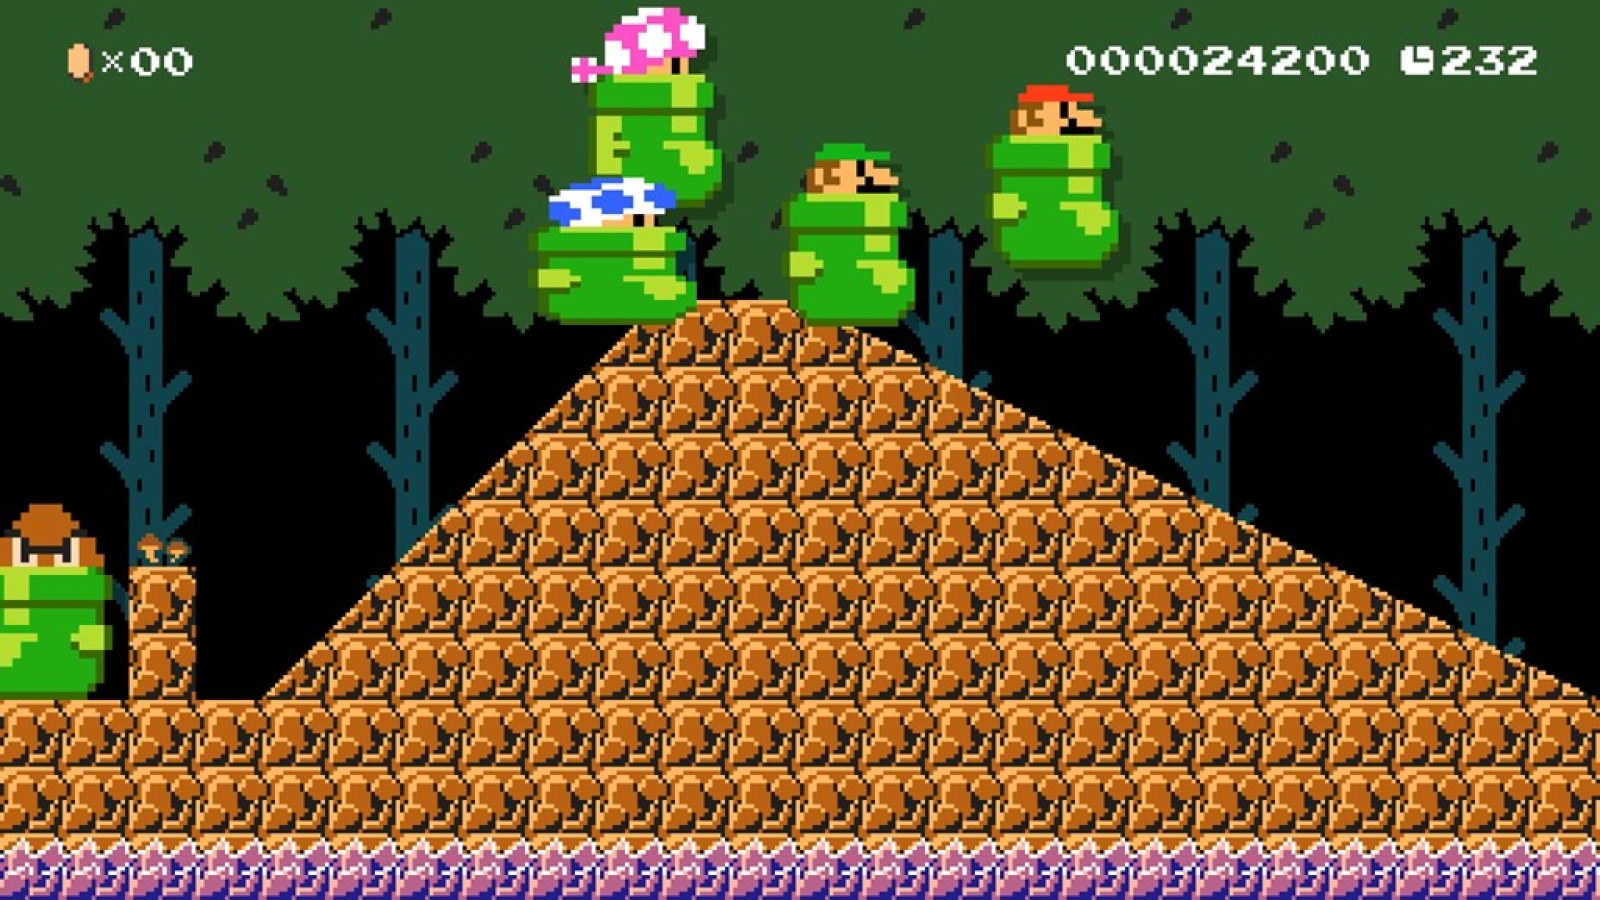 Super Mario Maker 2' has a story mode and online multiplayer